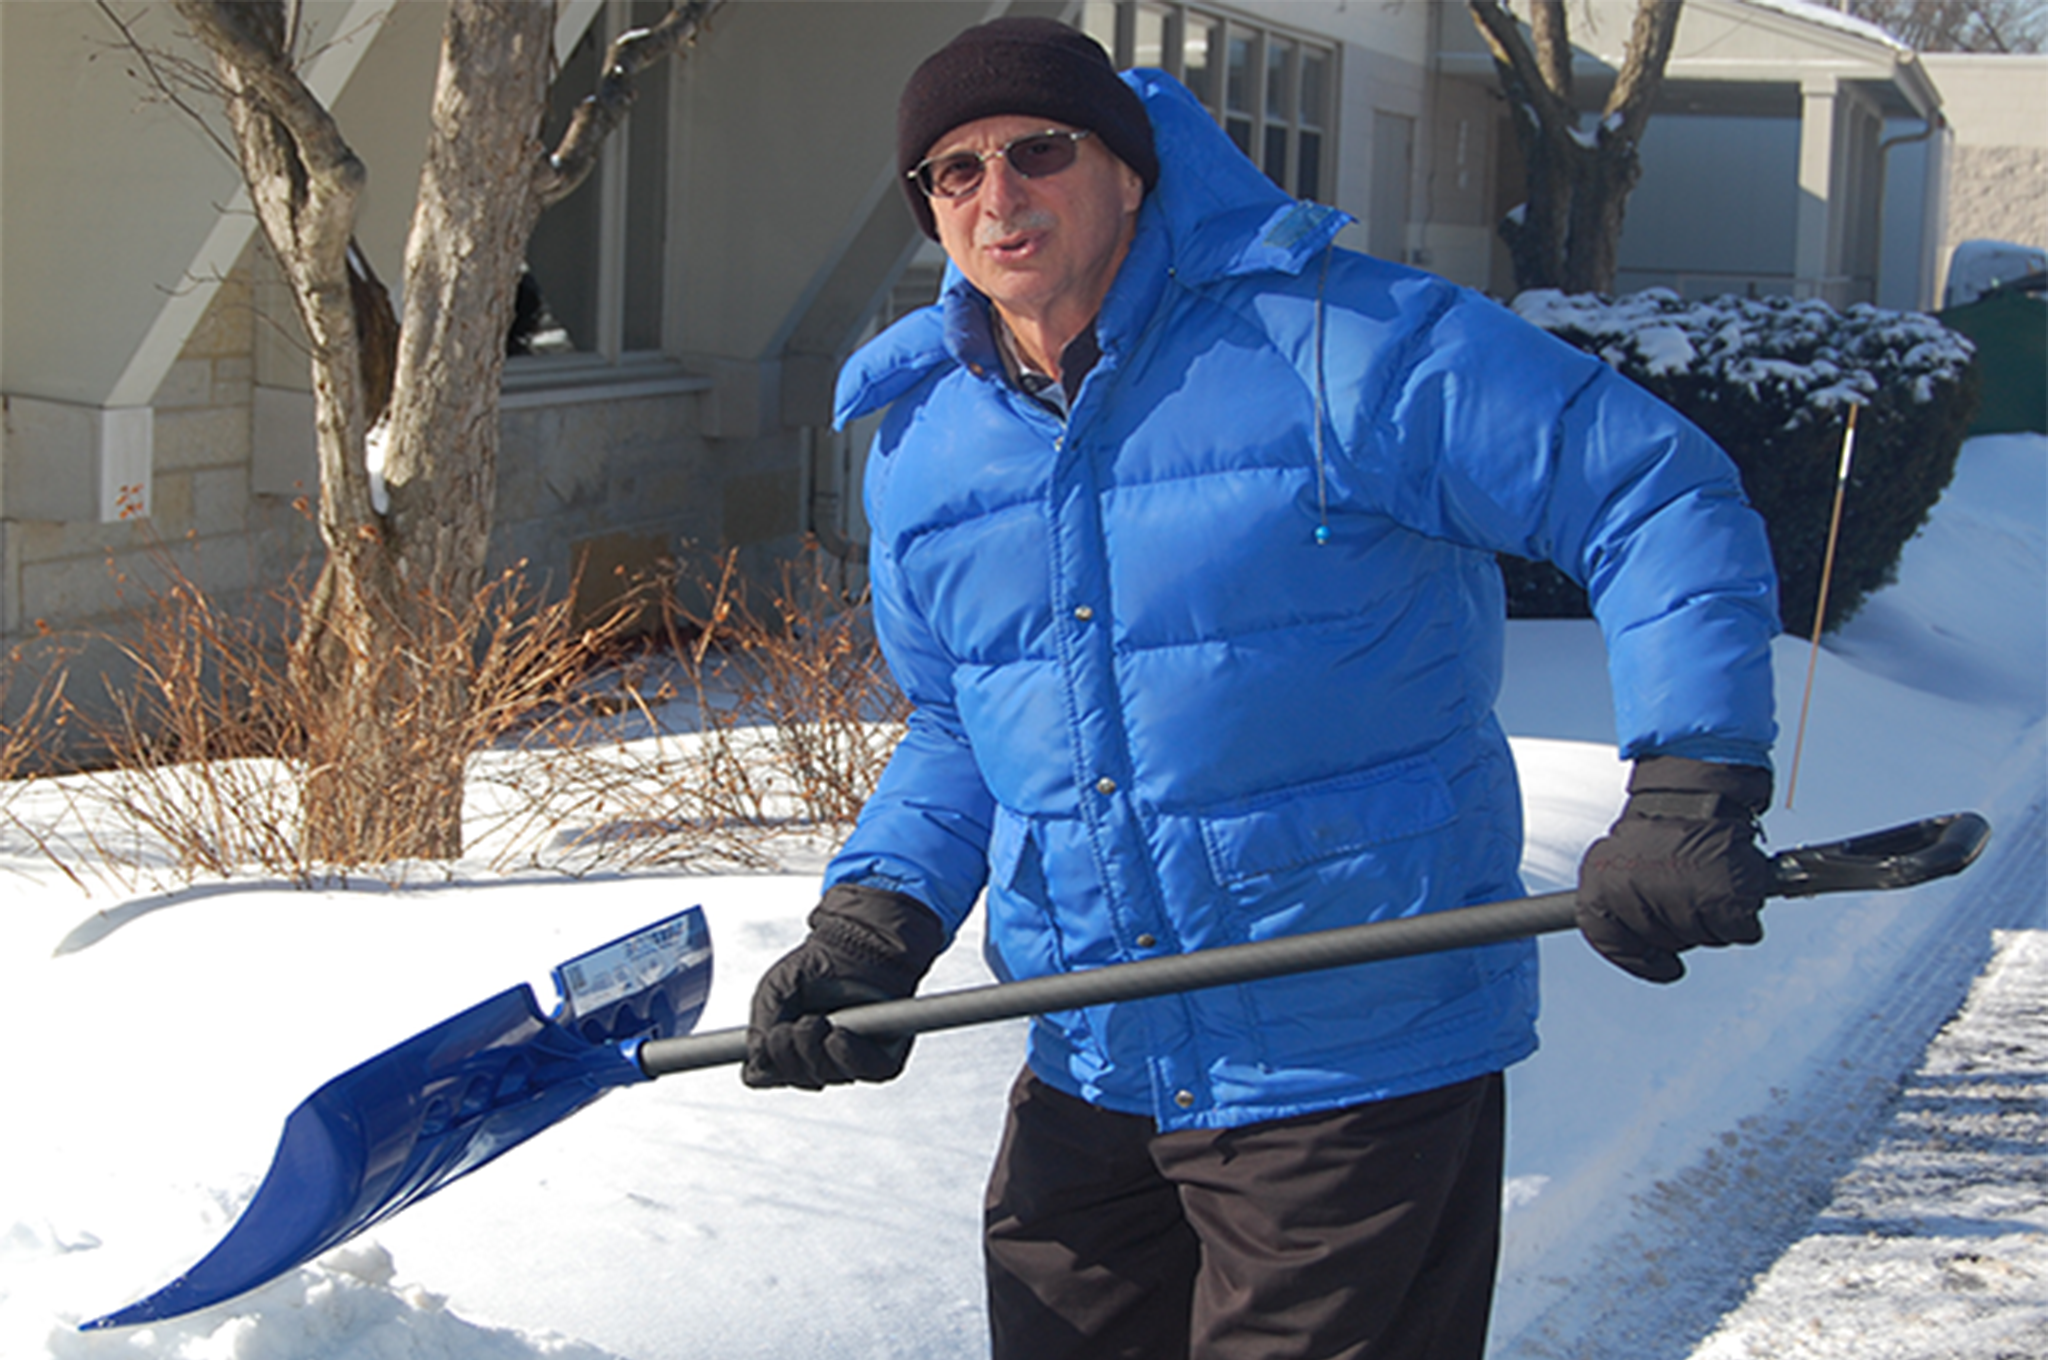 Father Dominic with Shovel